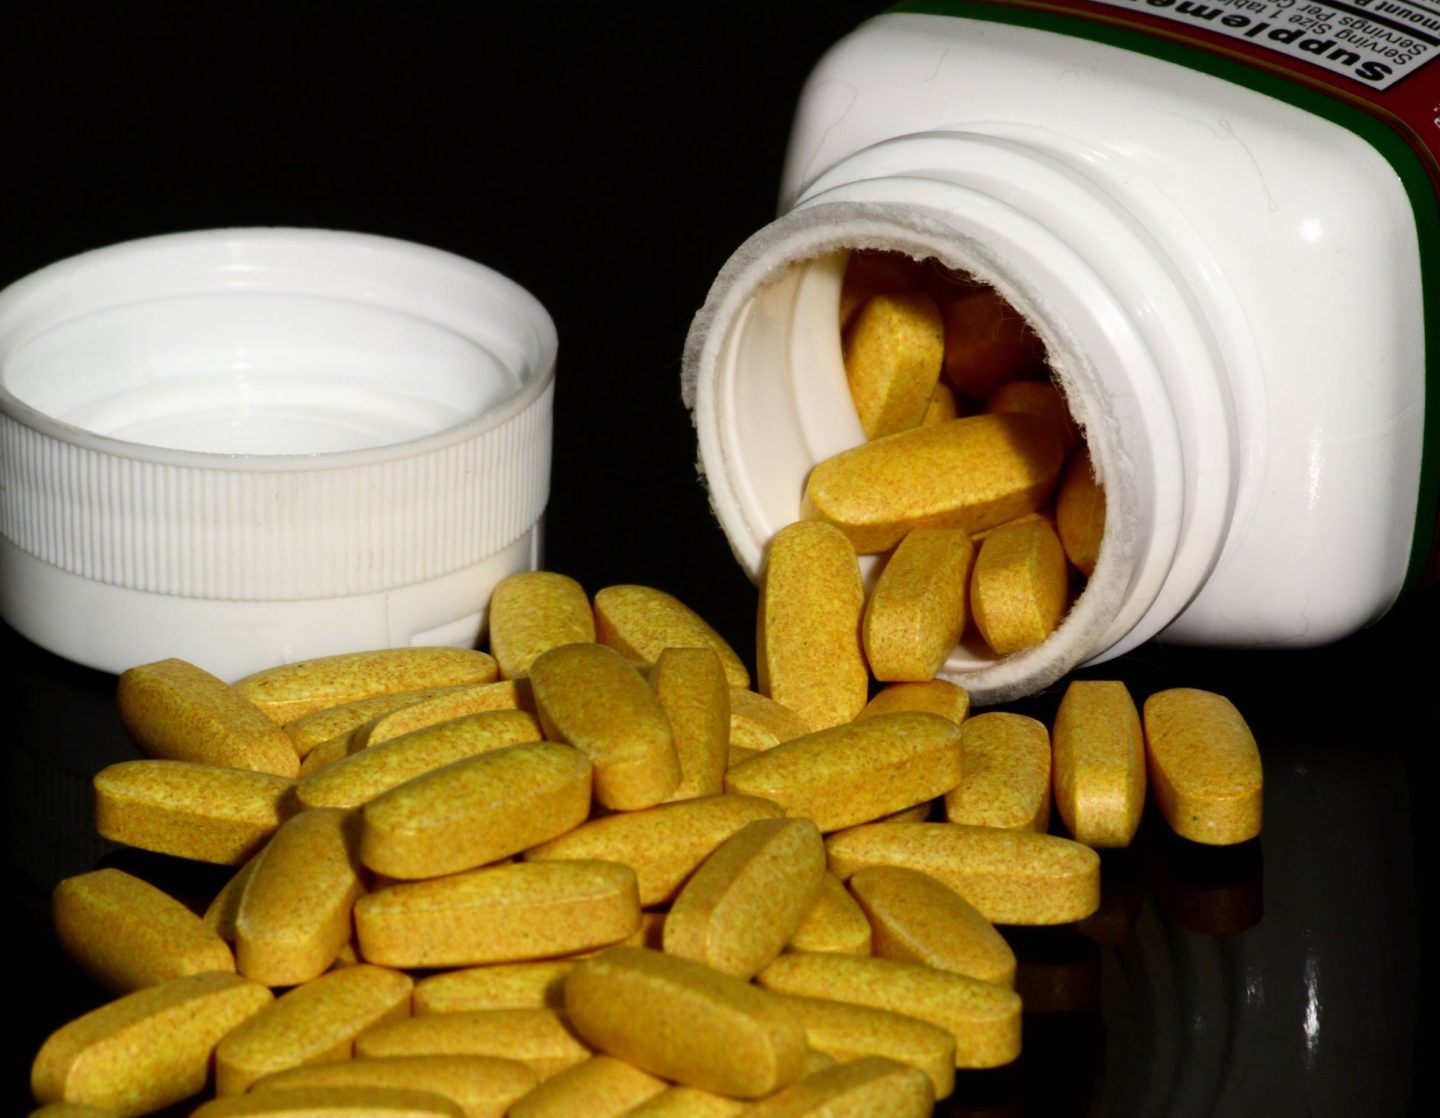 Are There Benefits to Magnesium Supplements? 24 Papers Reviewed